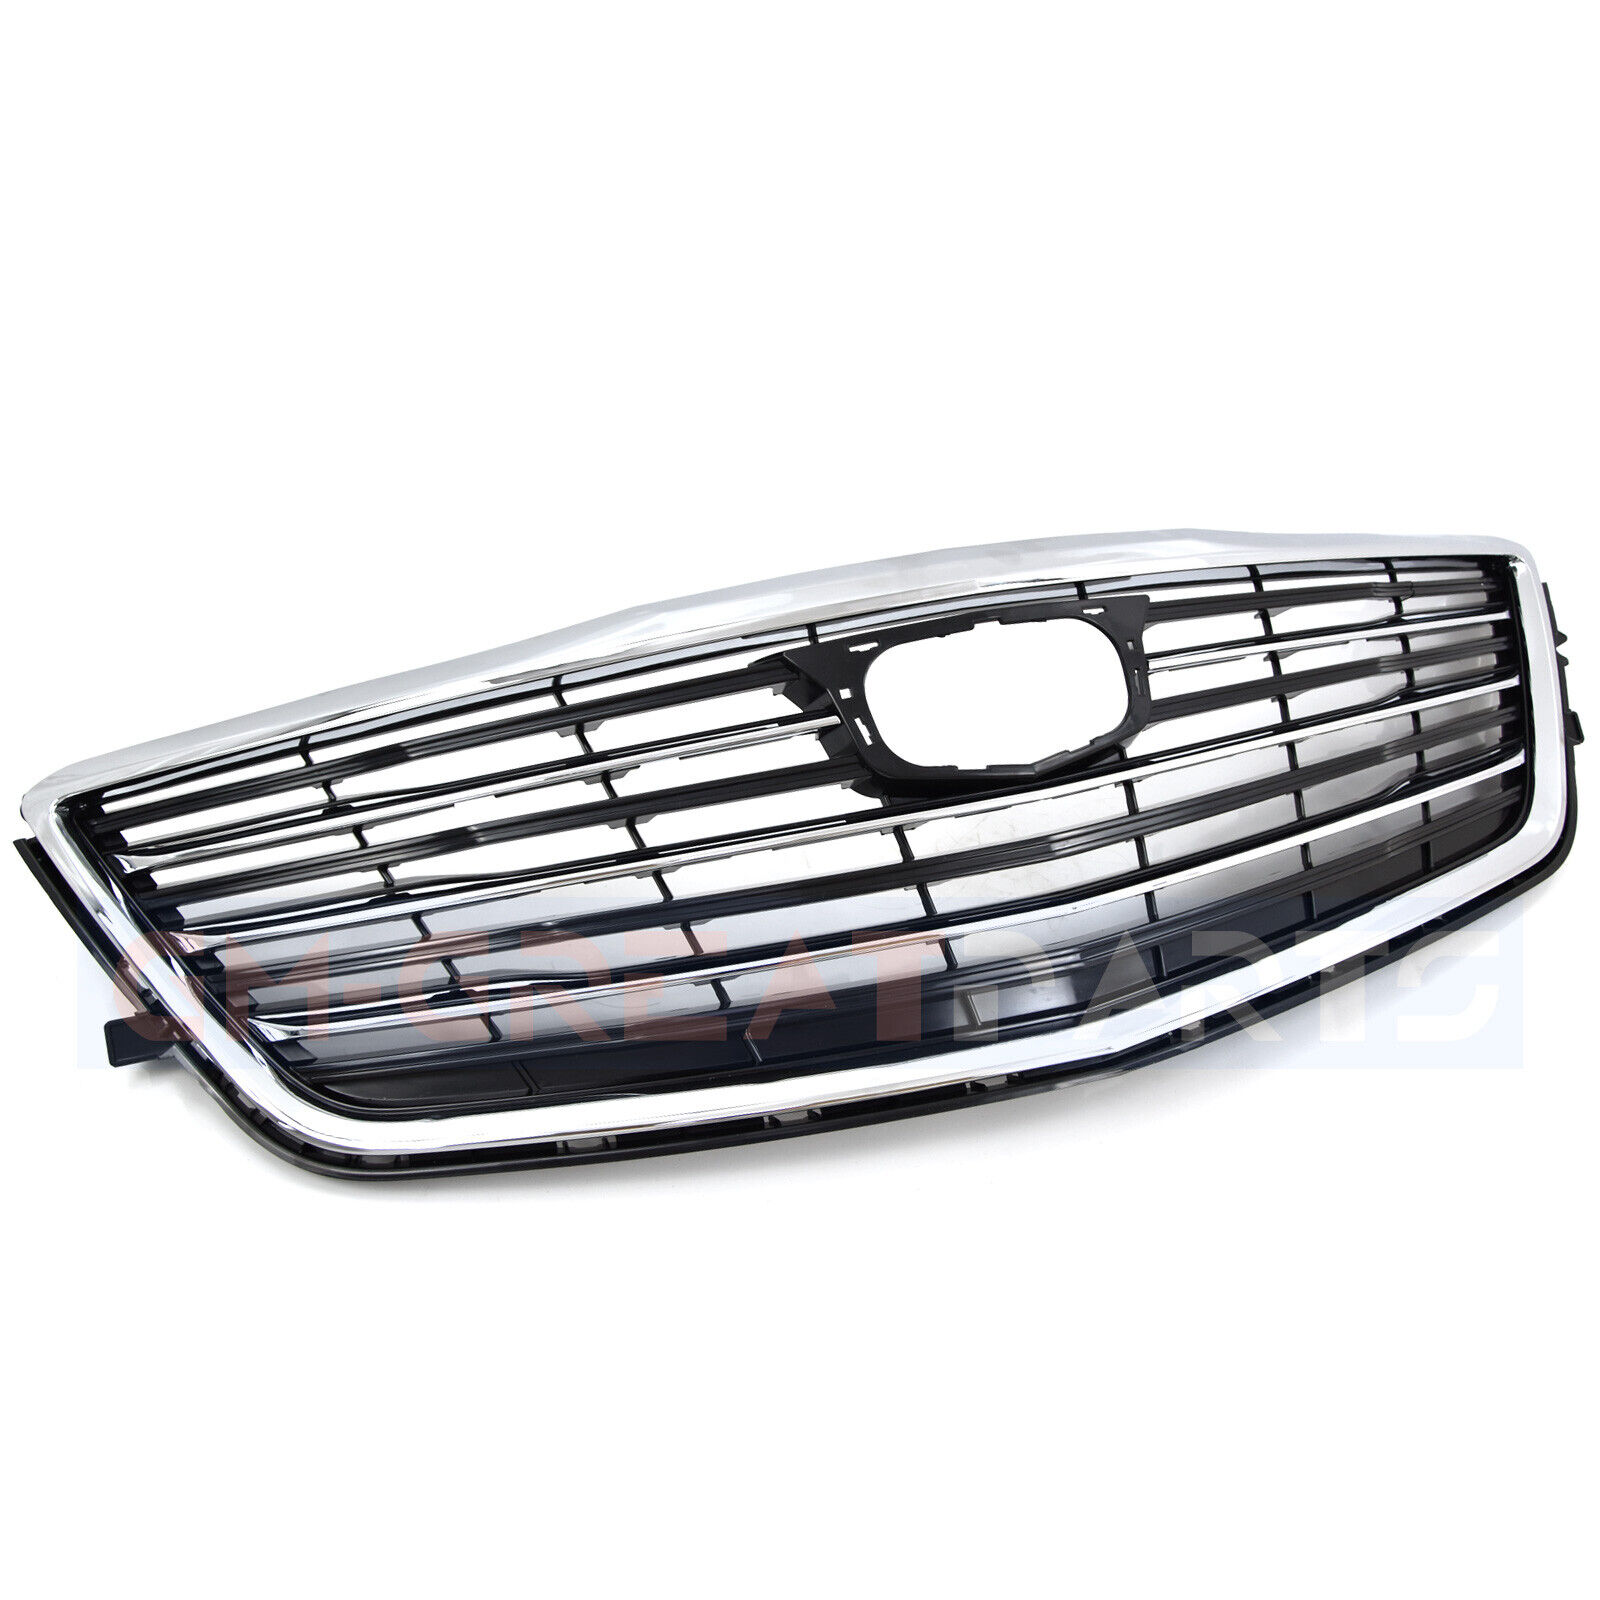 2016 2017 2018 Cadillac CT6 Front Upper Grille W/O EMBLEM 84124488 NEW OEM